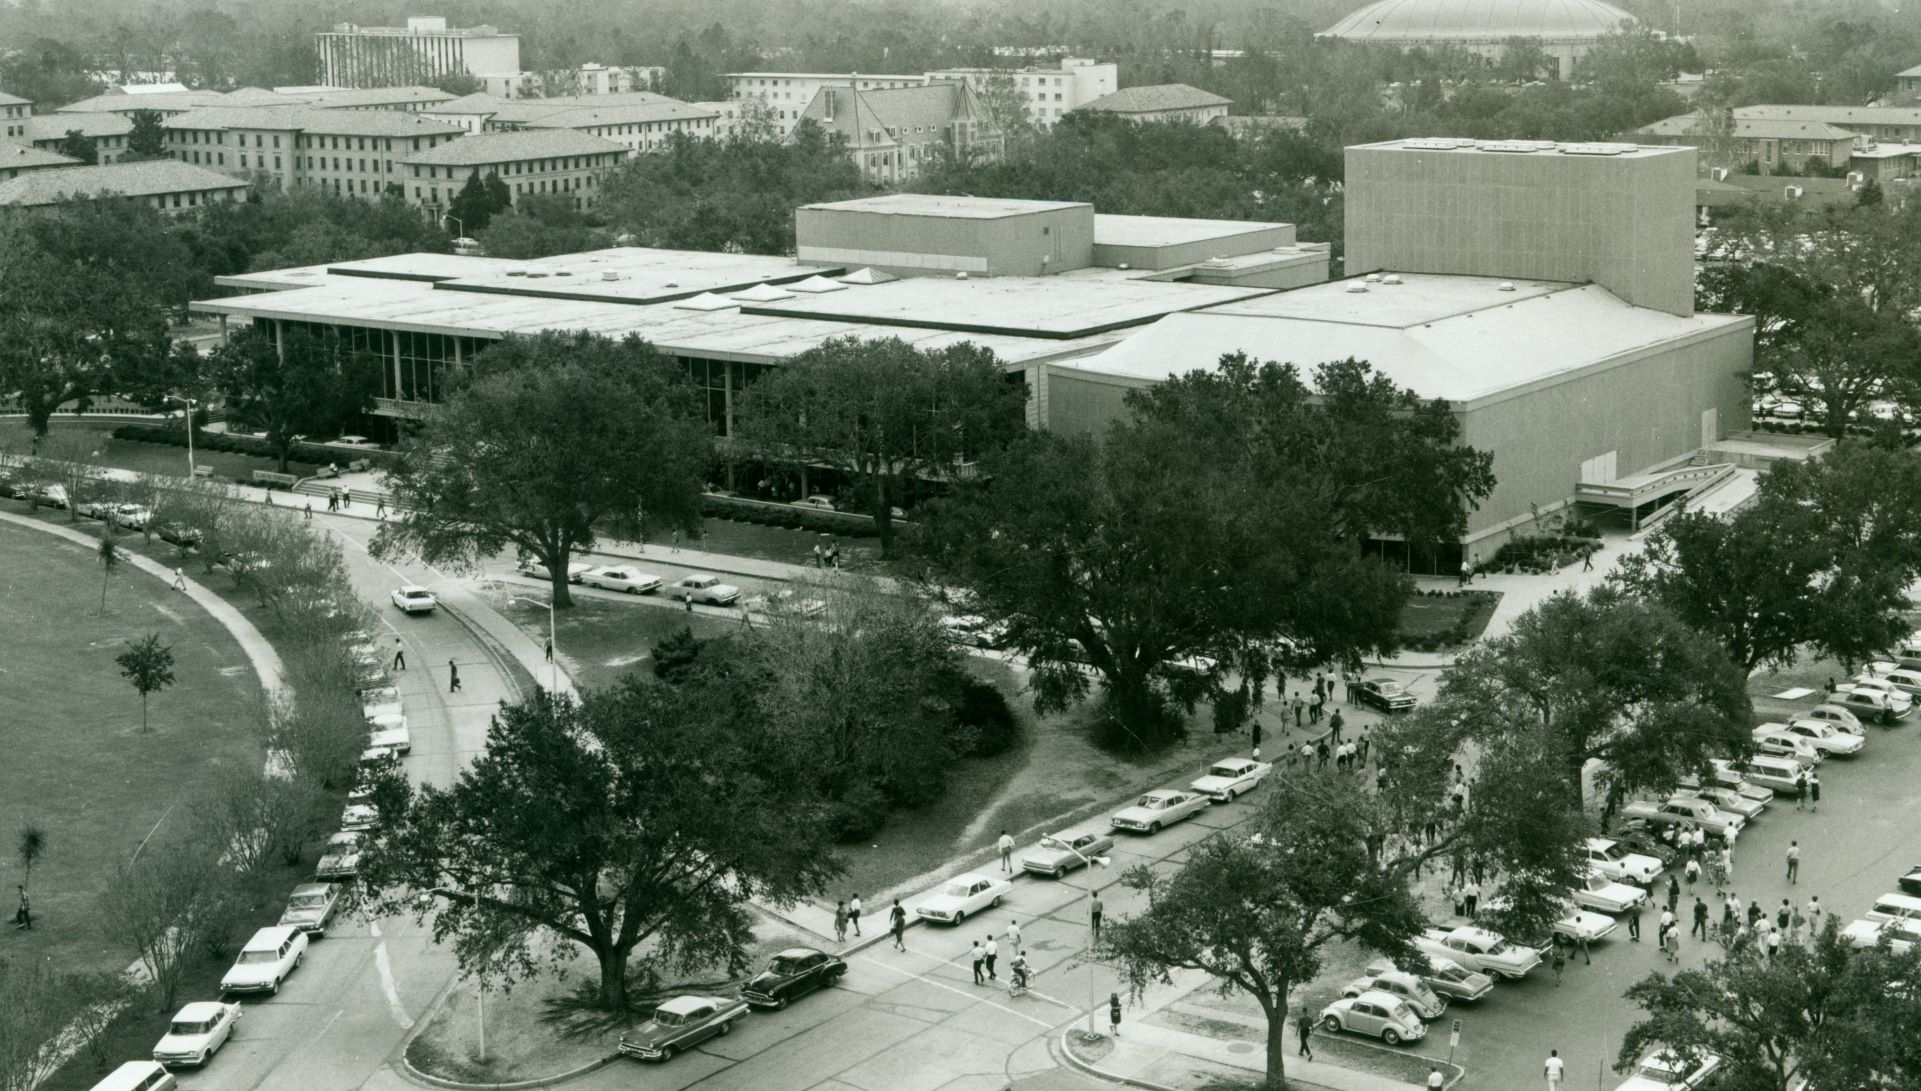 an aerial view of the student union from the past